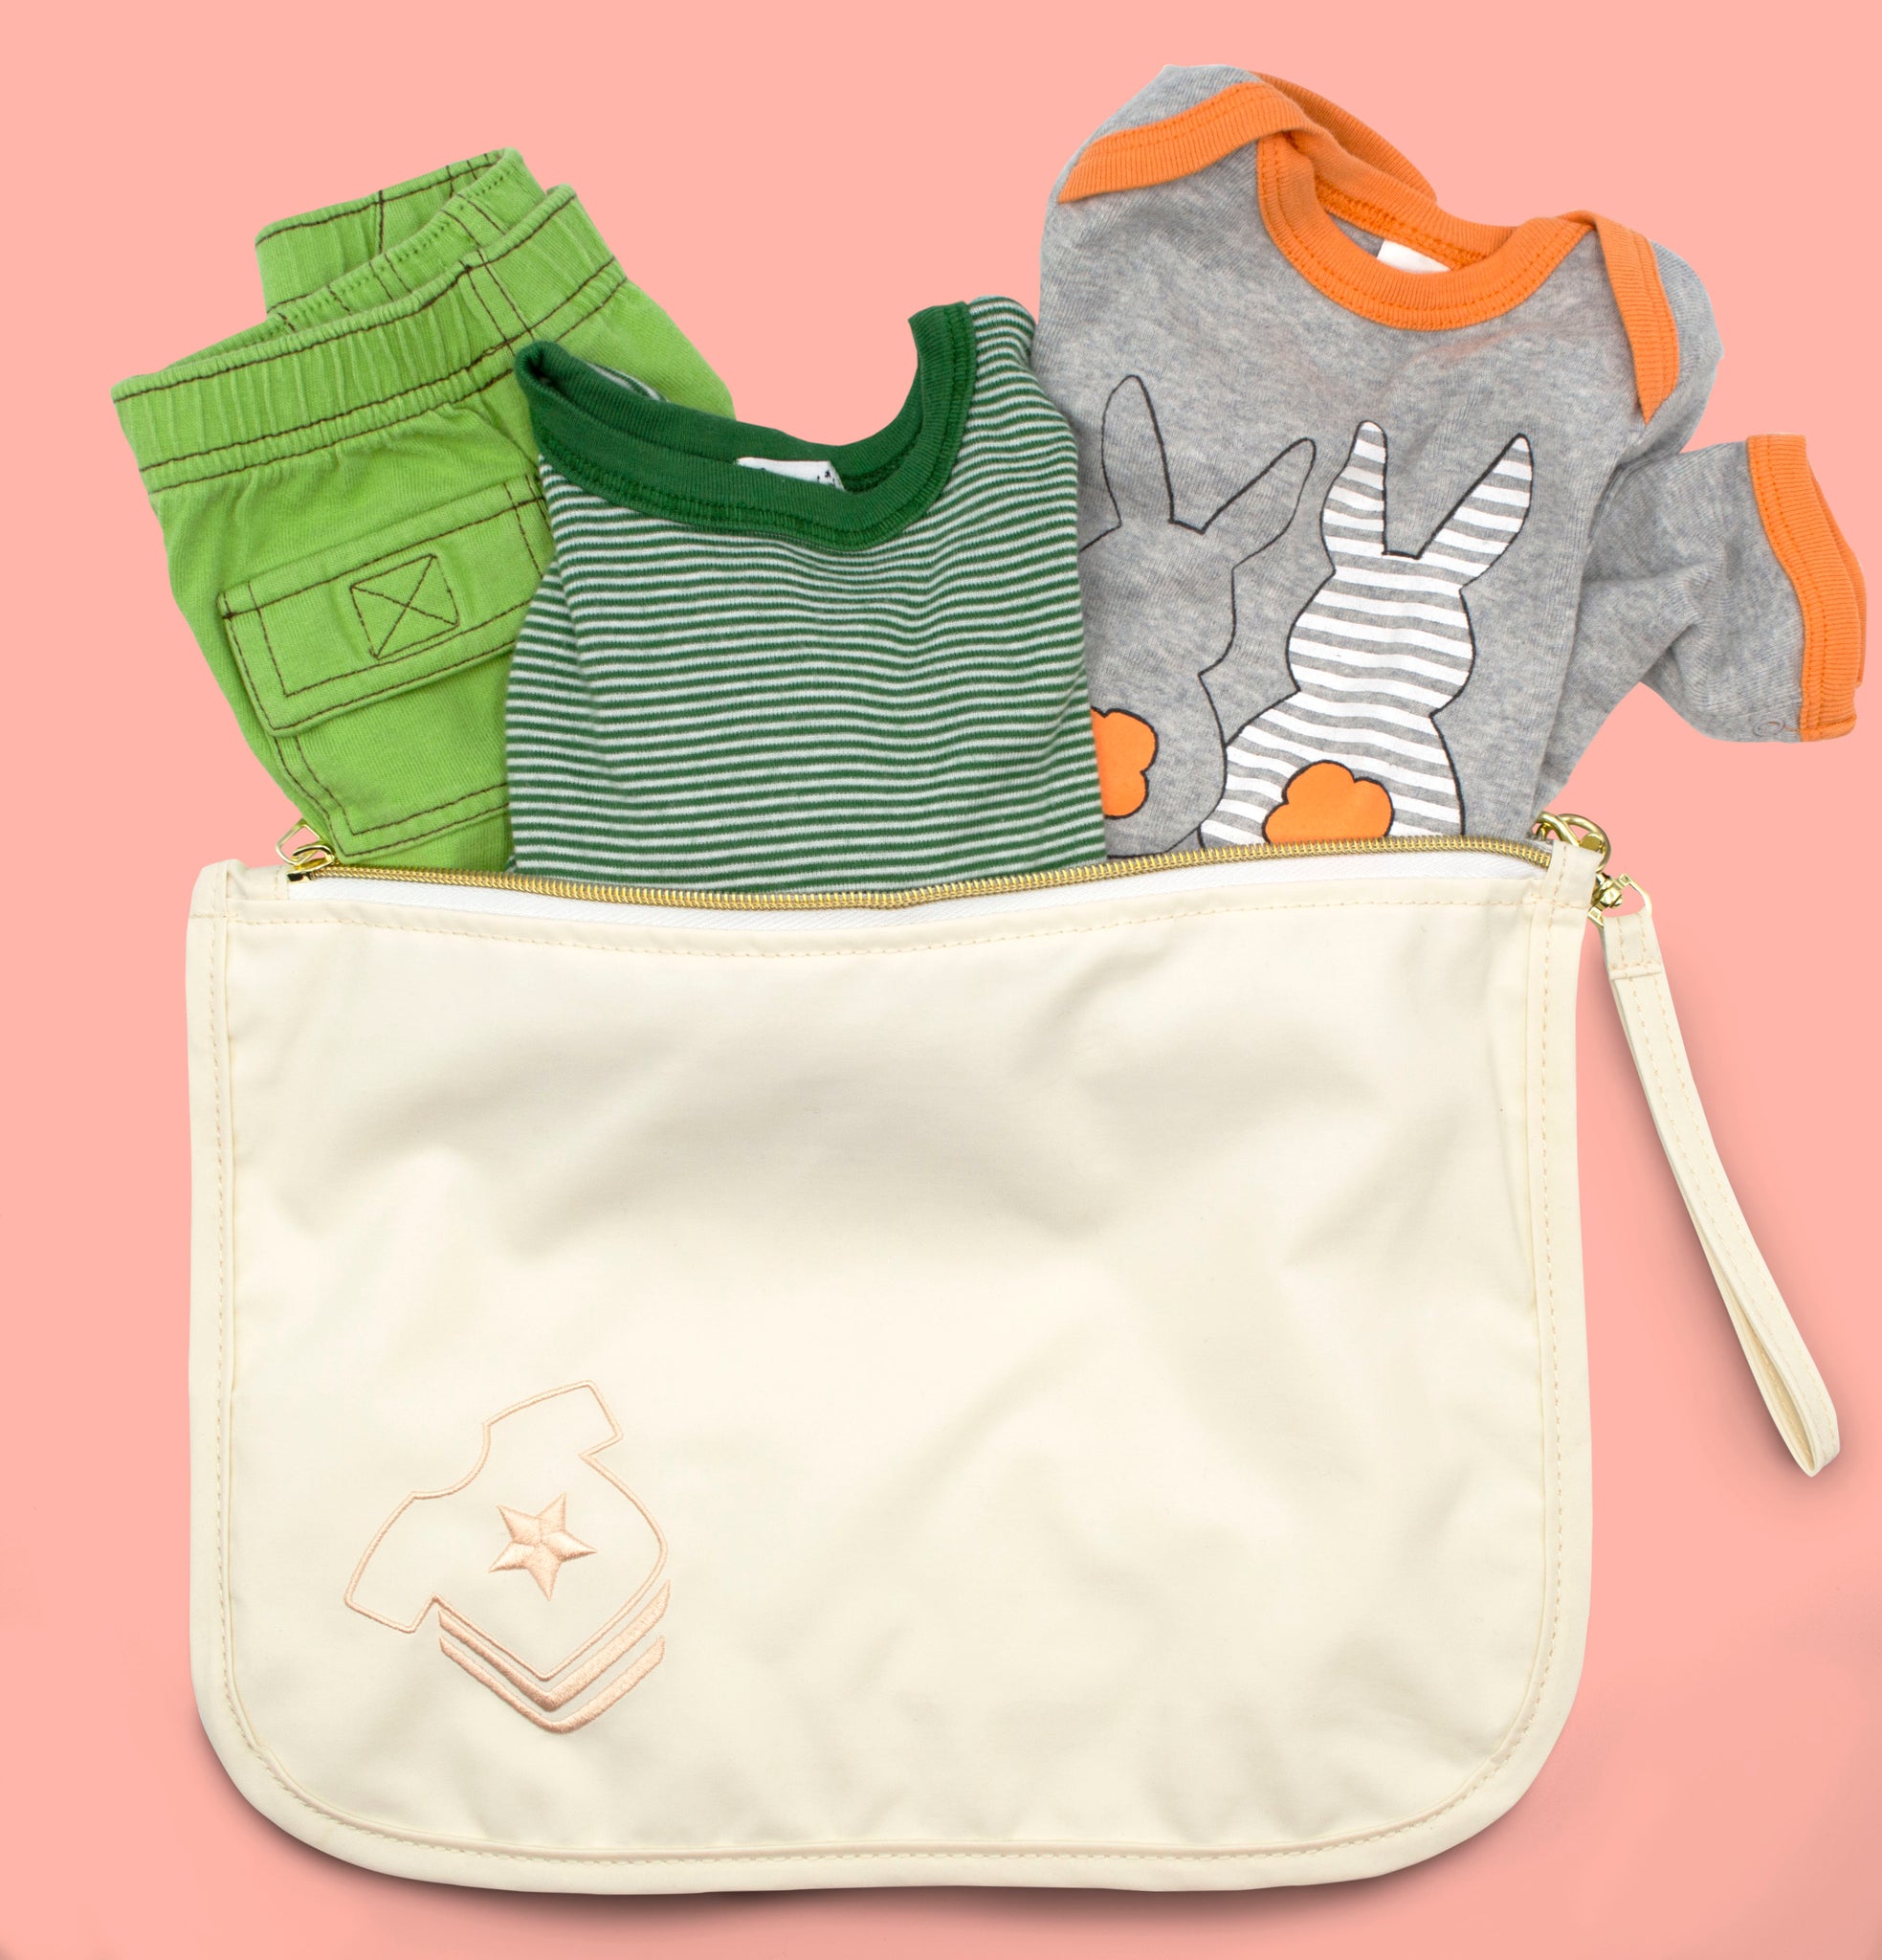 Tips For Taking Care Of Your Kyte Baby Clothes